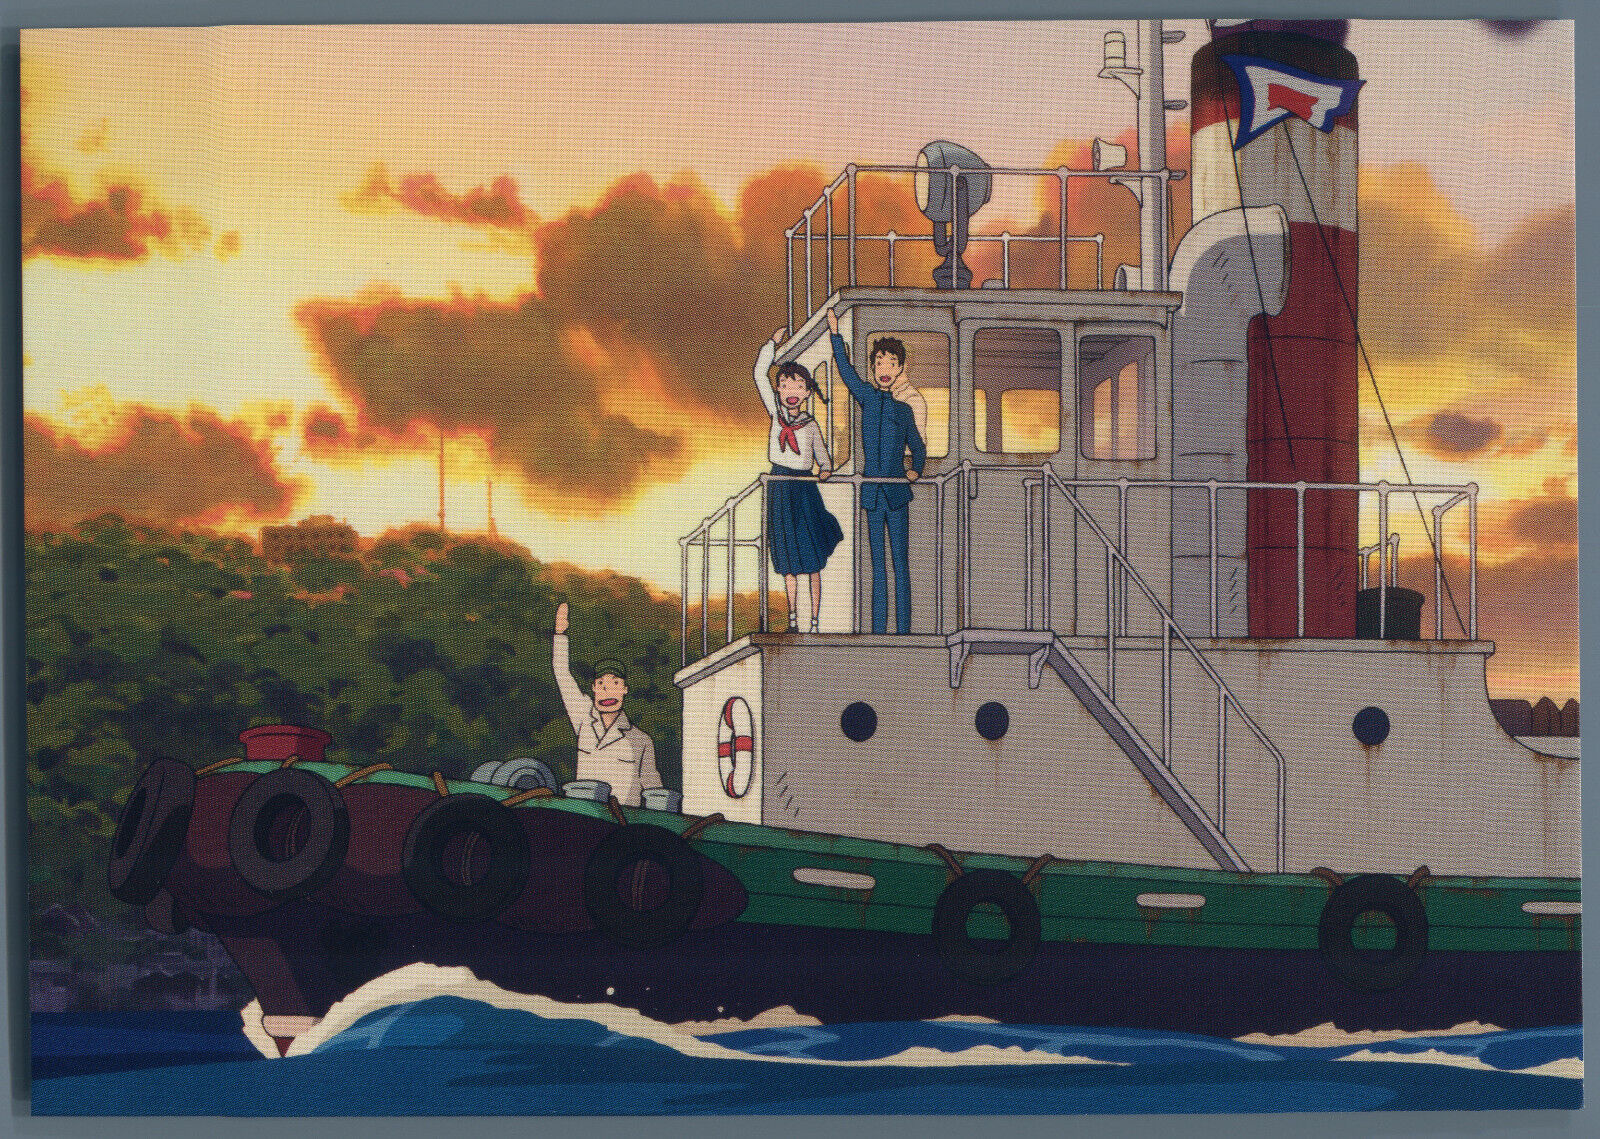 Studio Ghibli Postcard From Up On Poppy Hill Shun and Umi Waving to Cpt Yoshio